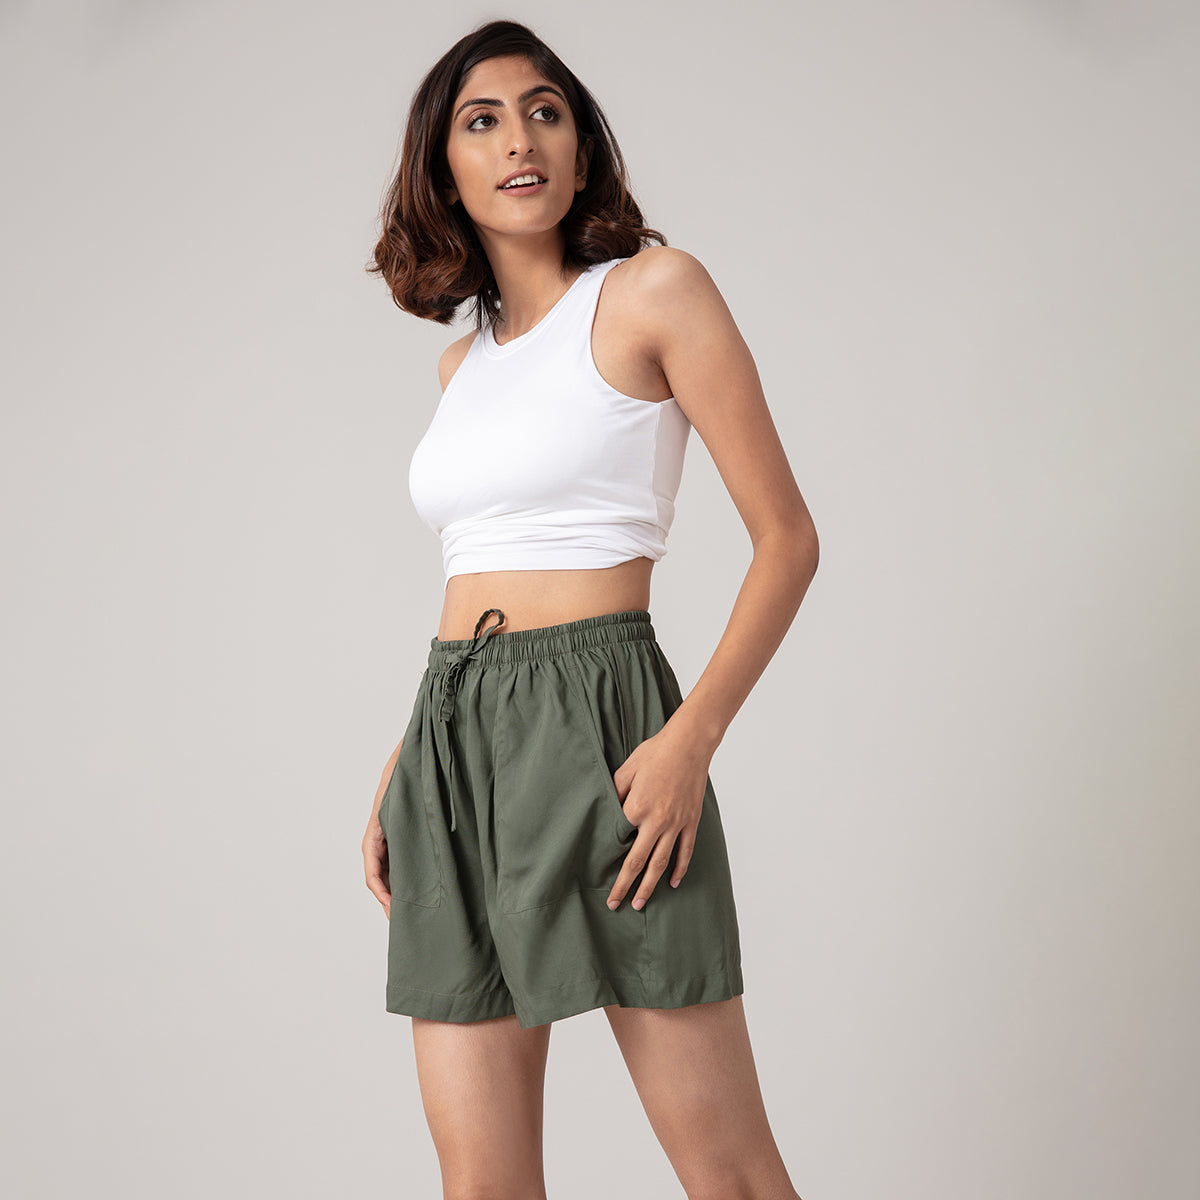 Comfy Vibes All Day Shorts  - Beetle Green NYS035